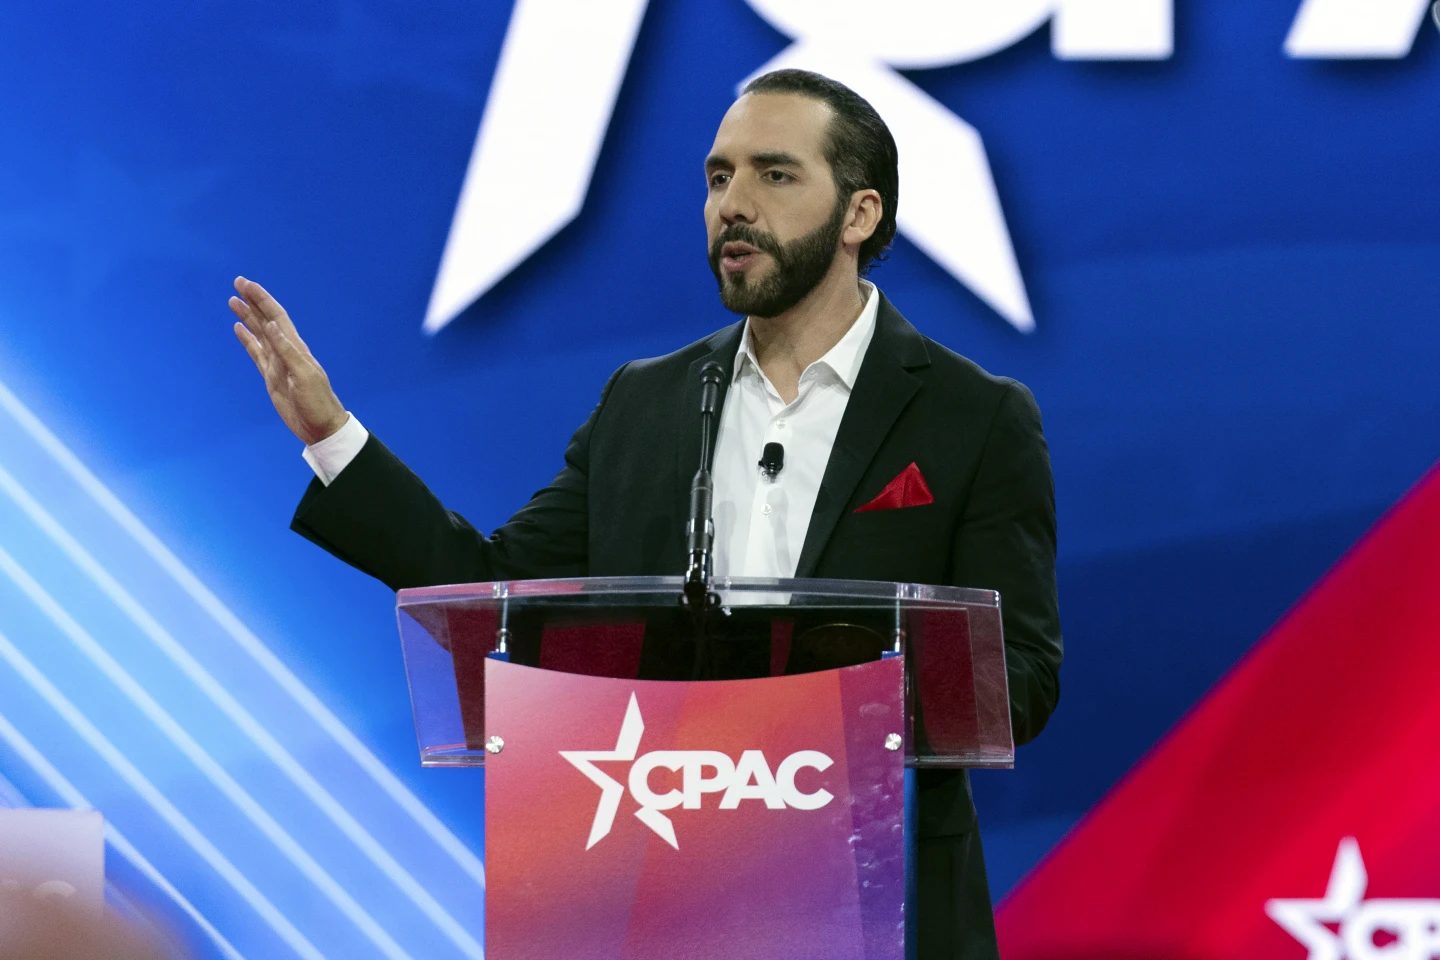 El Salvador’s President Gets Rock-Star Welcome At Conservative CPAC Gathering Outside Washington